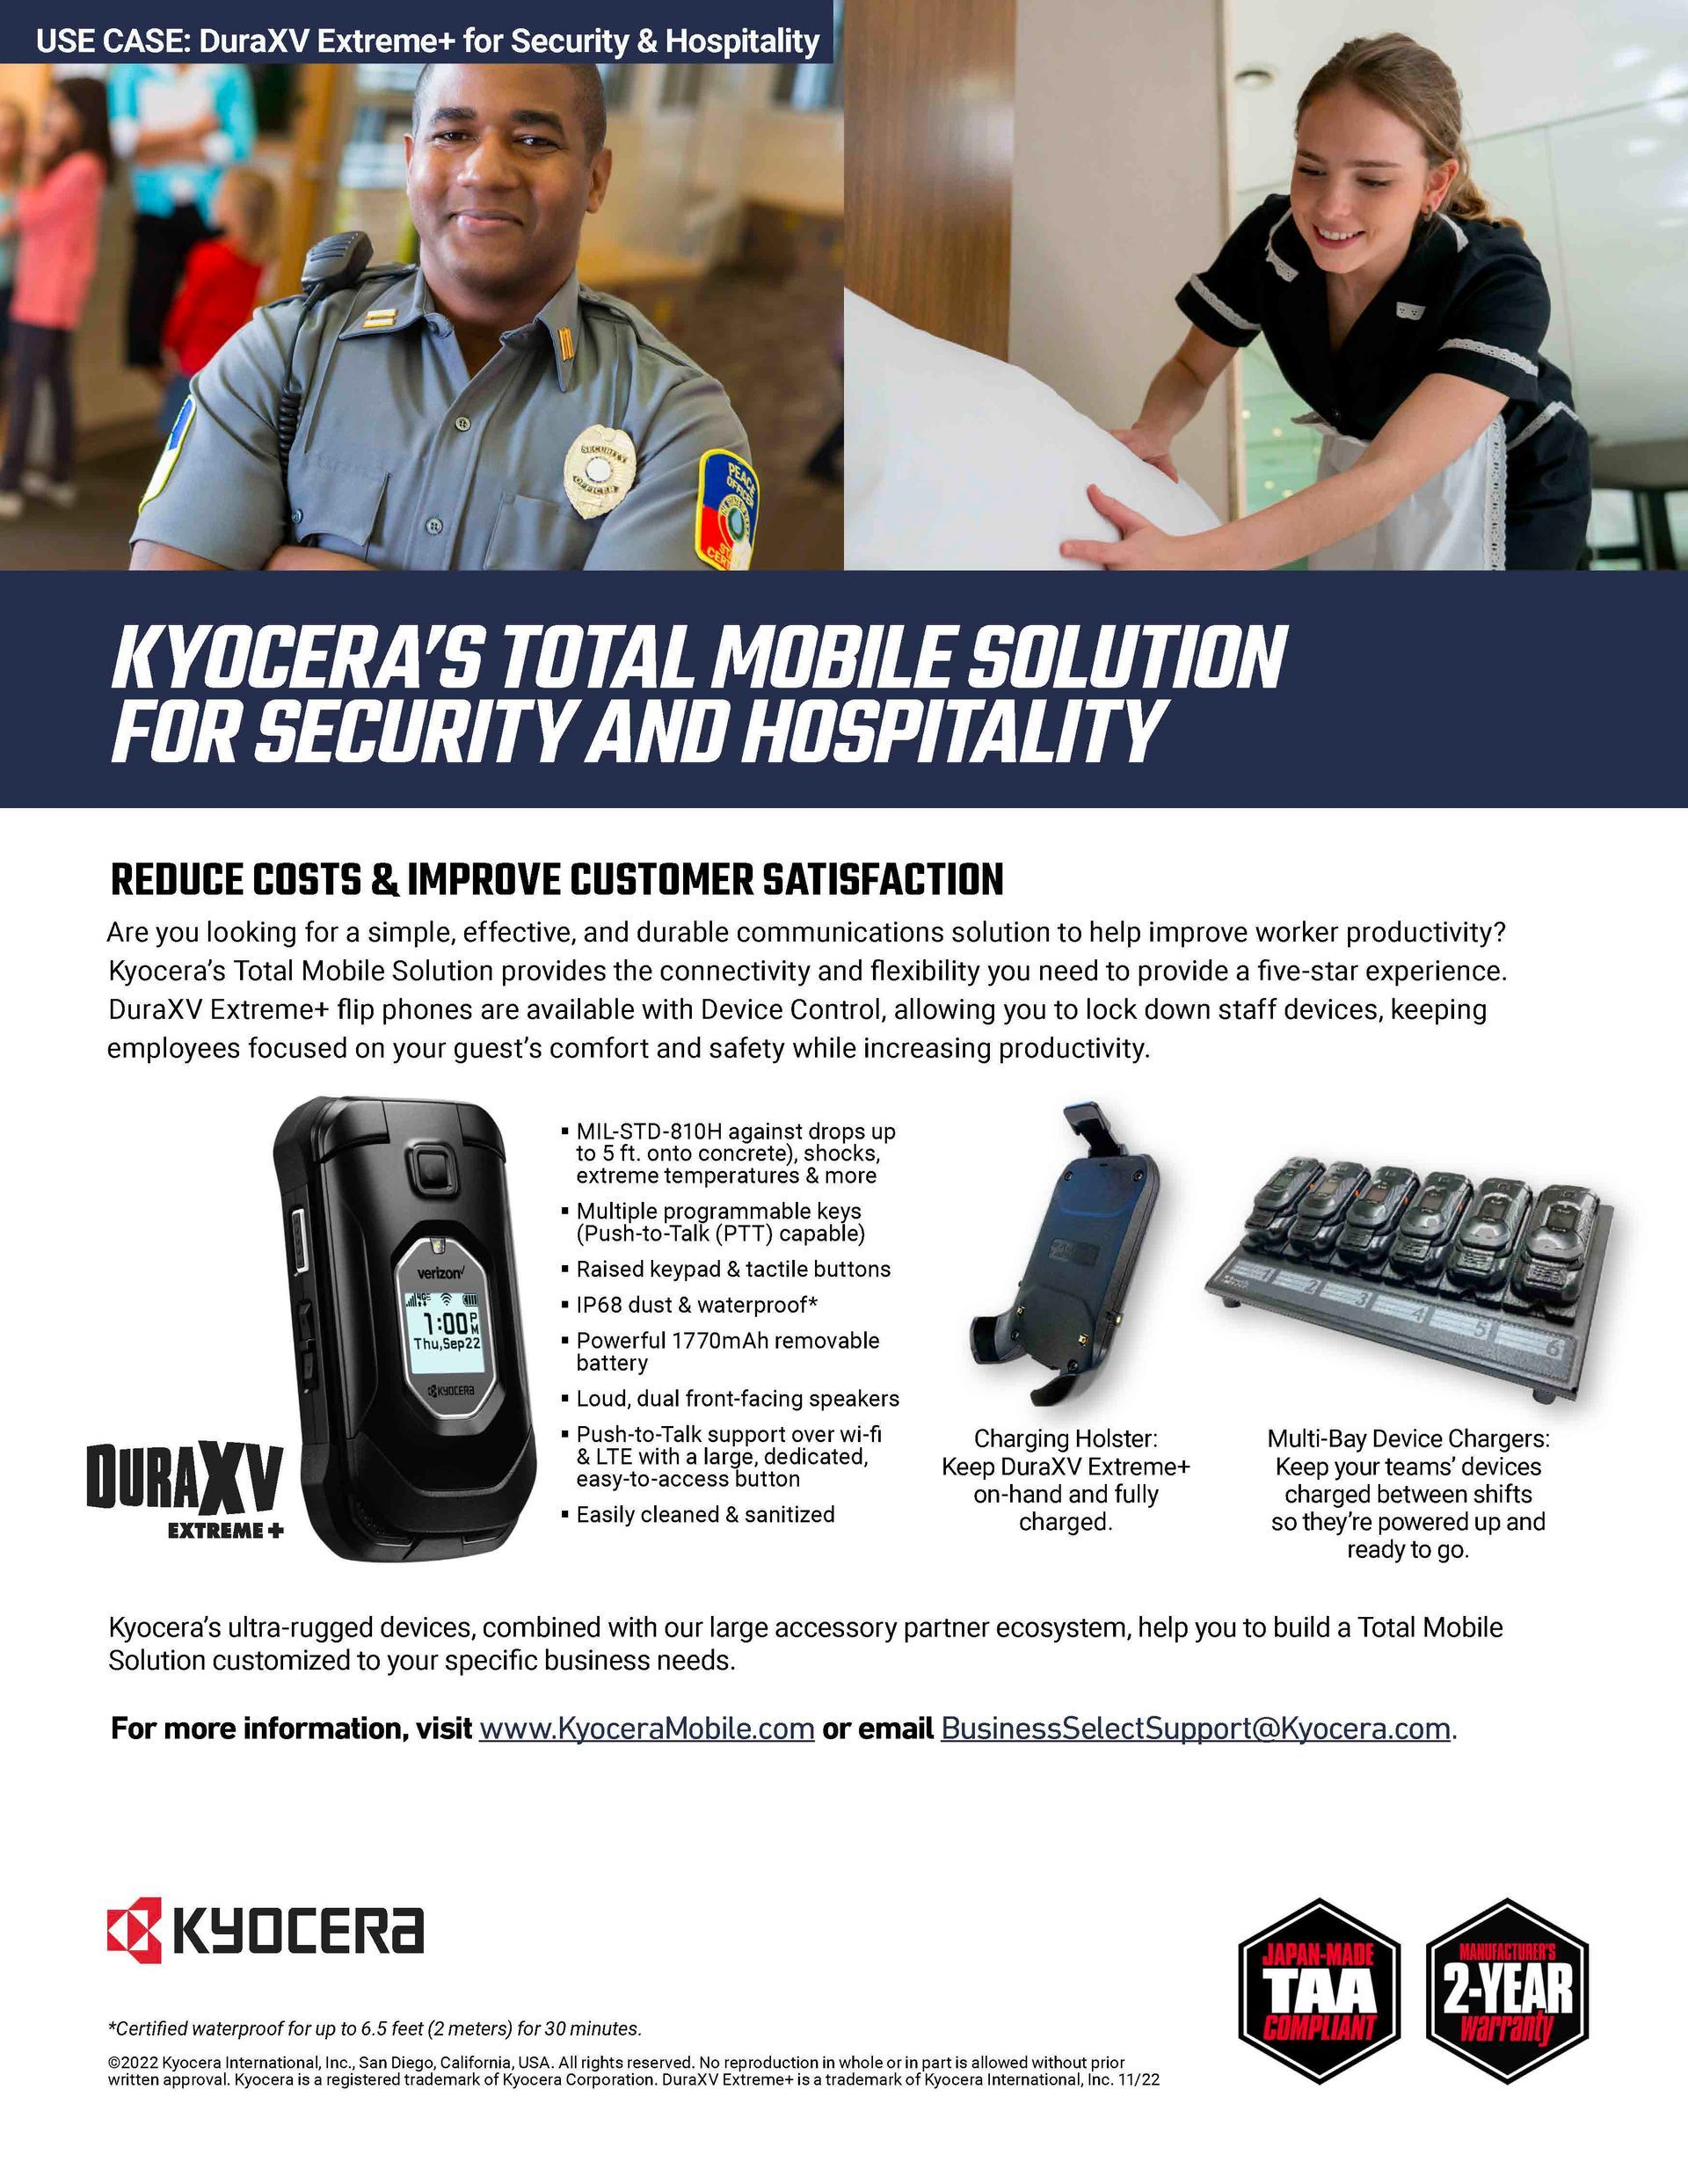 A brochure for kyocera 's total mobile solution for security and hospitality.